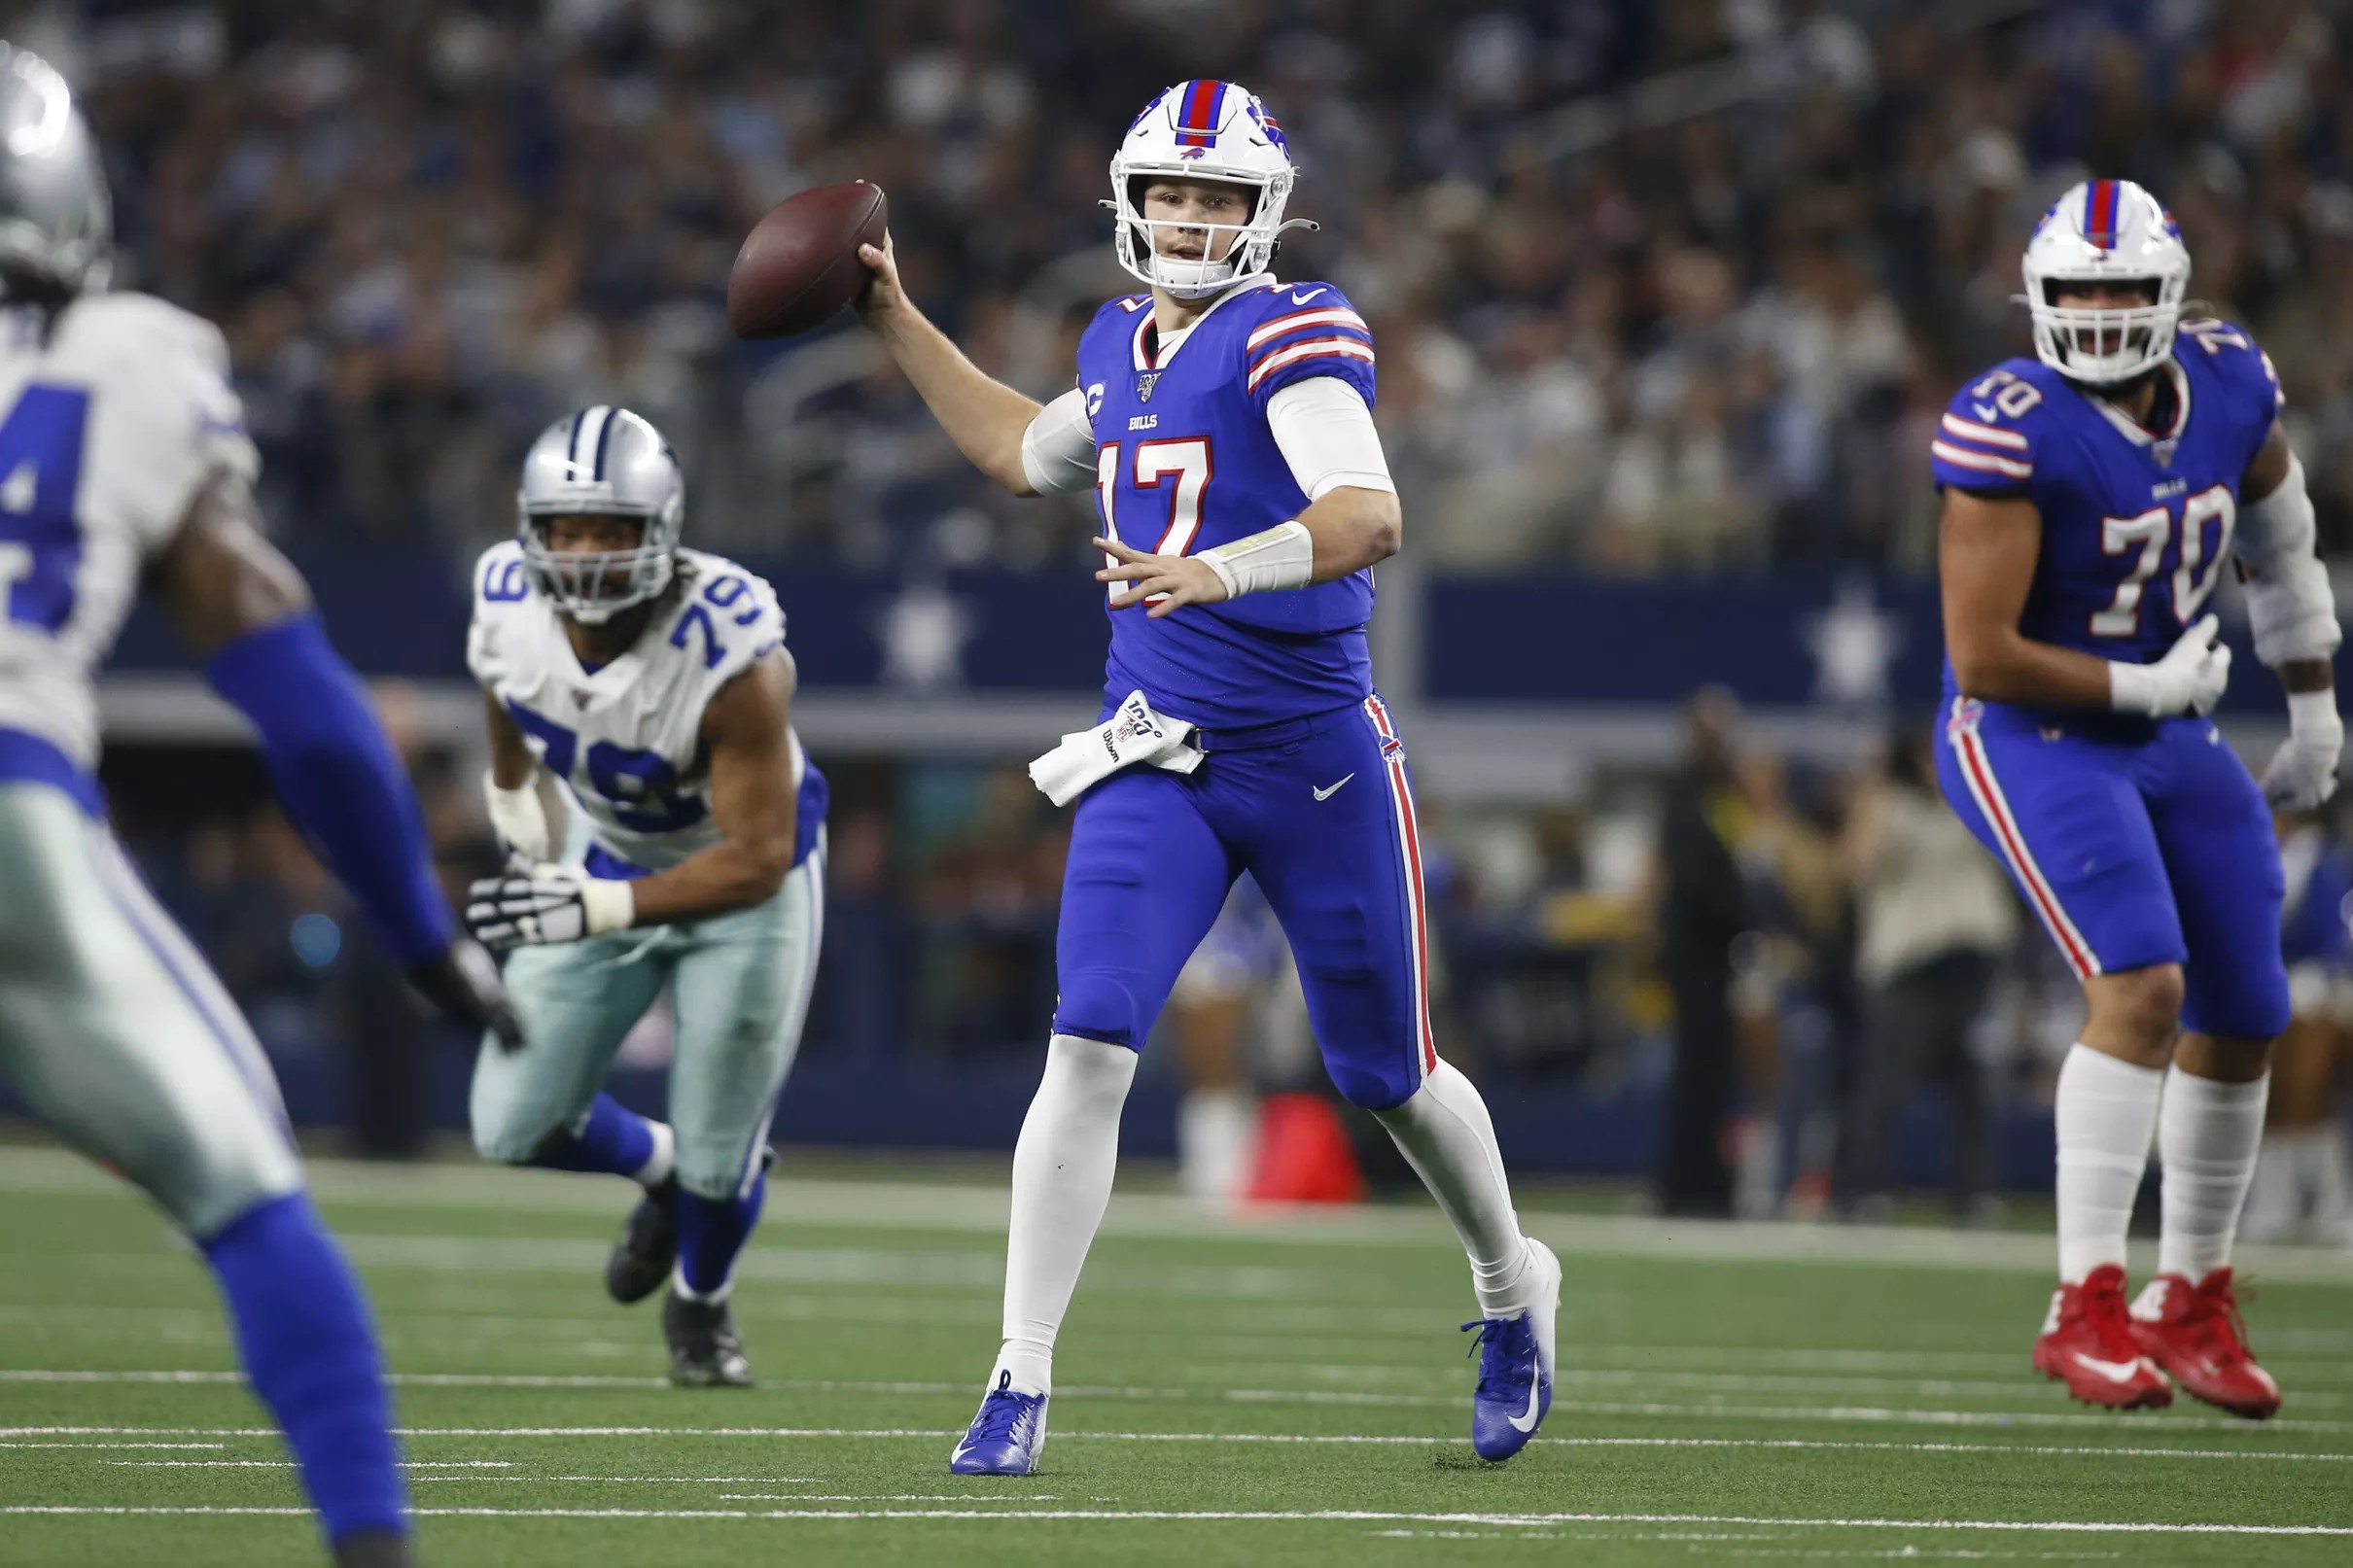 Five nonscoring plays that shaped the Cowboys game against the Bills